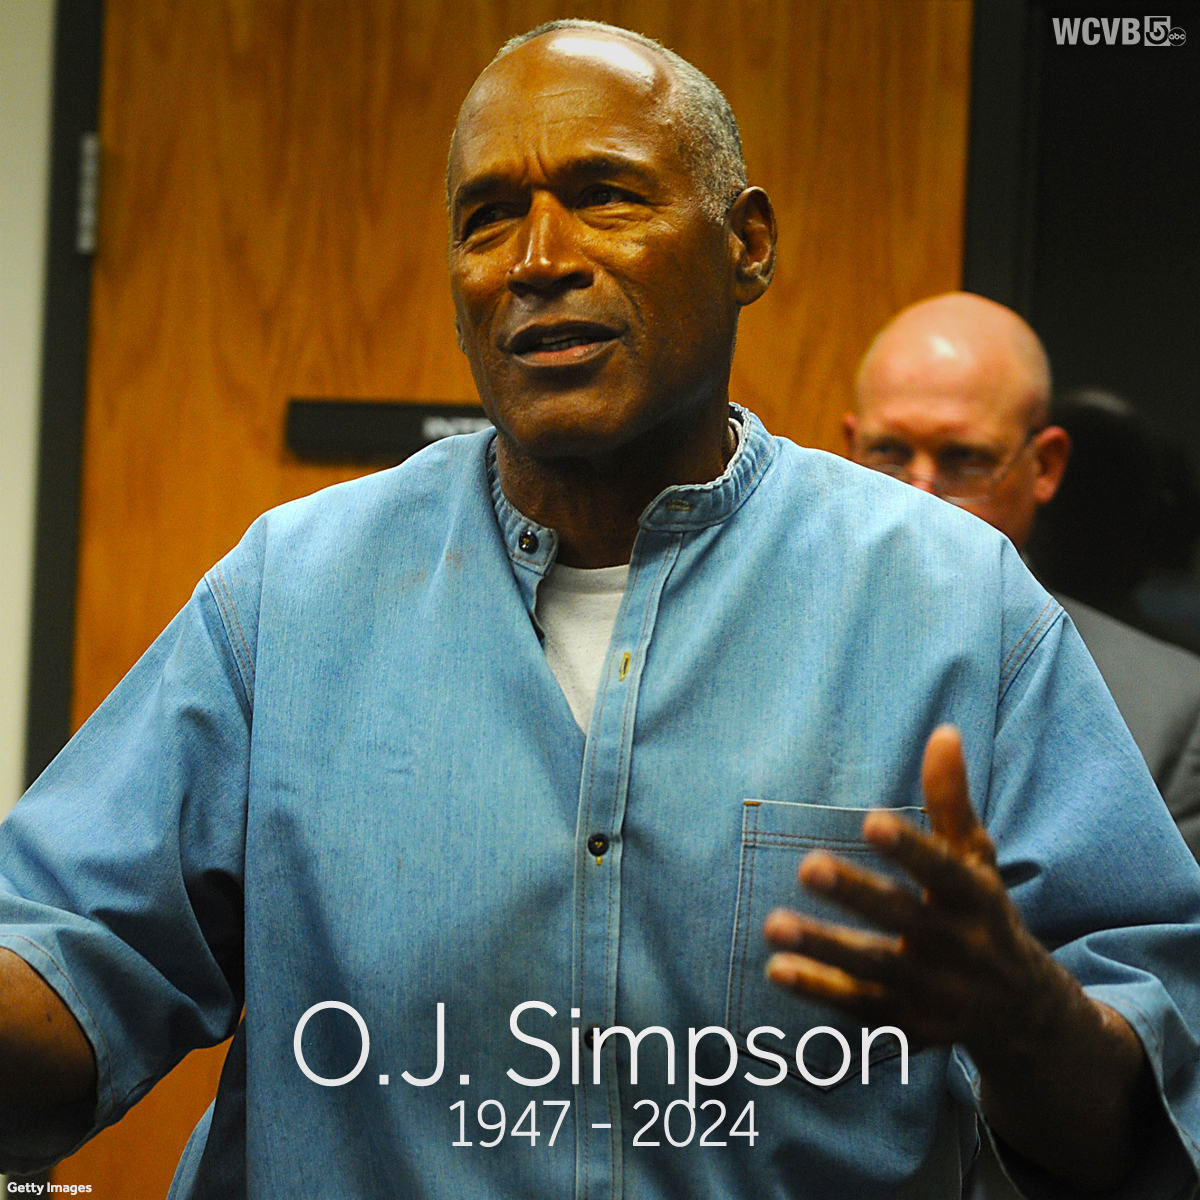 O.J. Simpson, the former NFL star turned actor who was the defendant in one of the country's most high-profile murder trials in the 1990s, died Wednesday at the age of 76 after battling cancer.